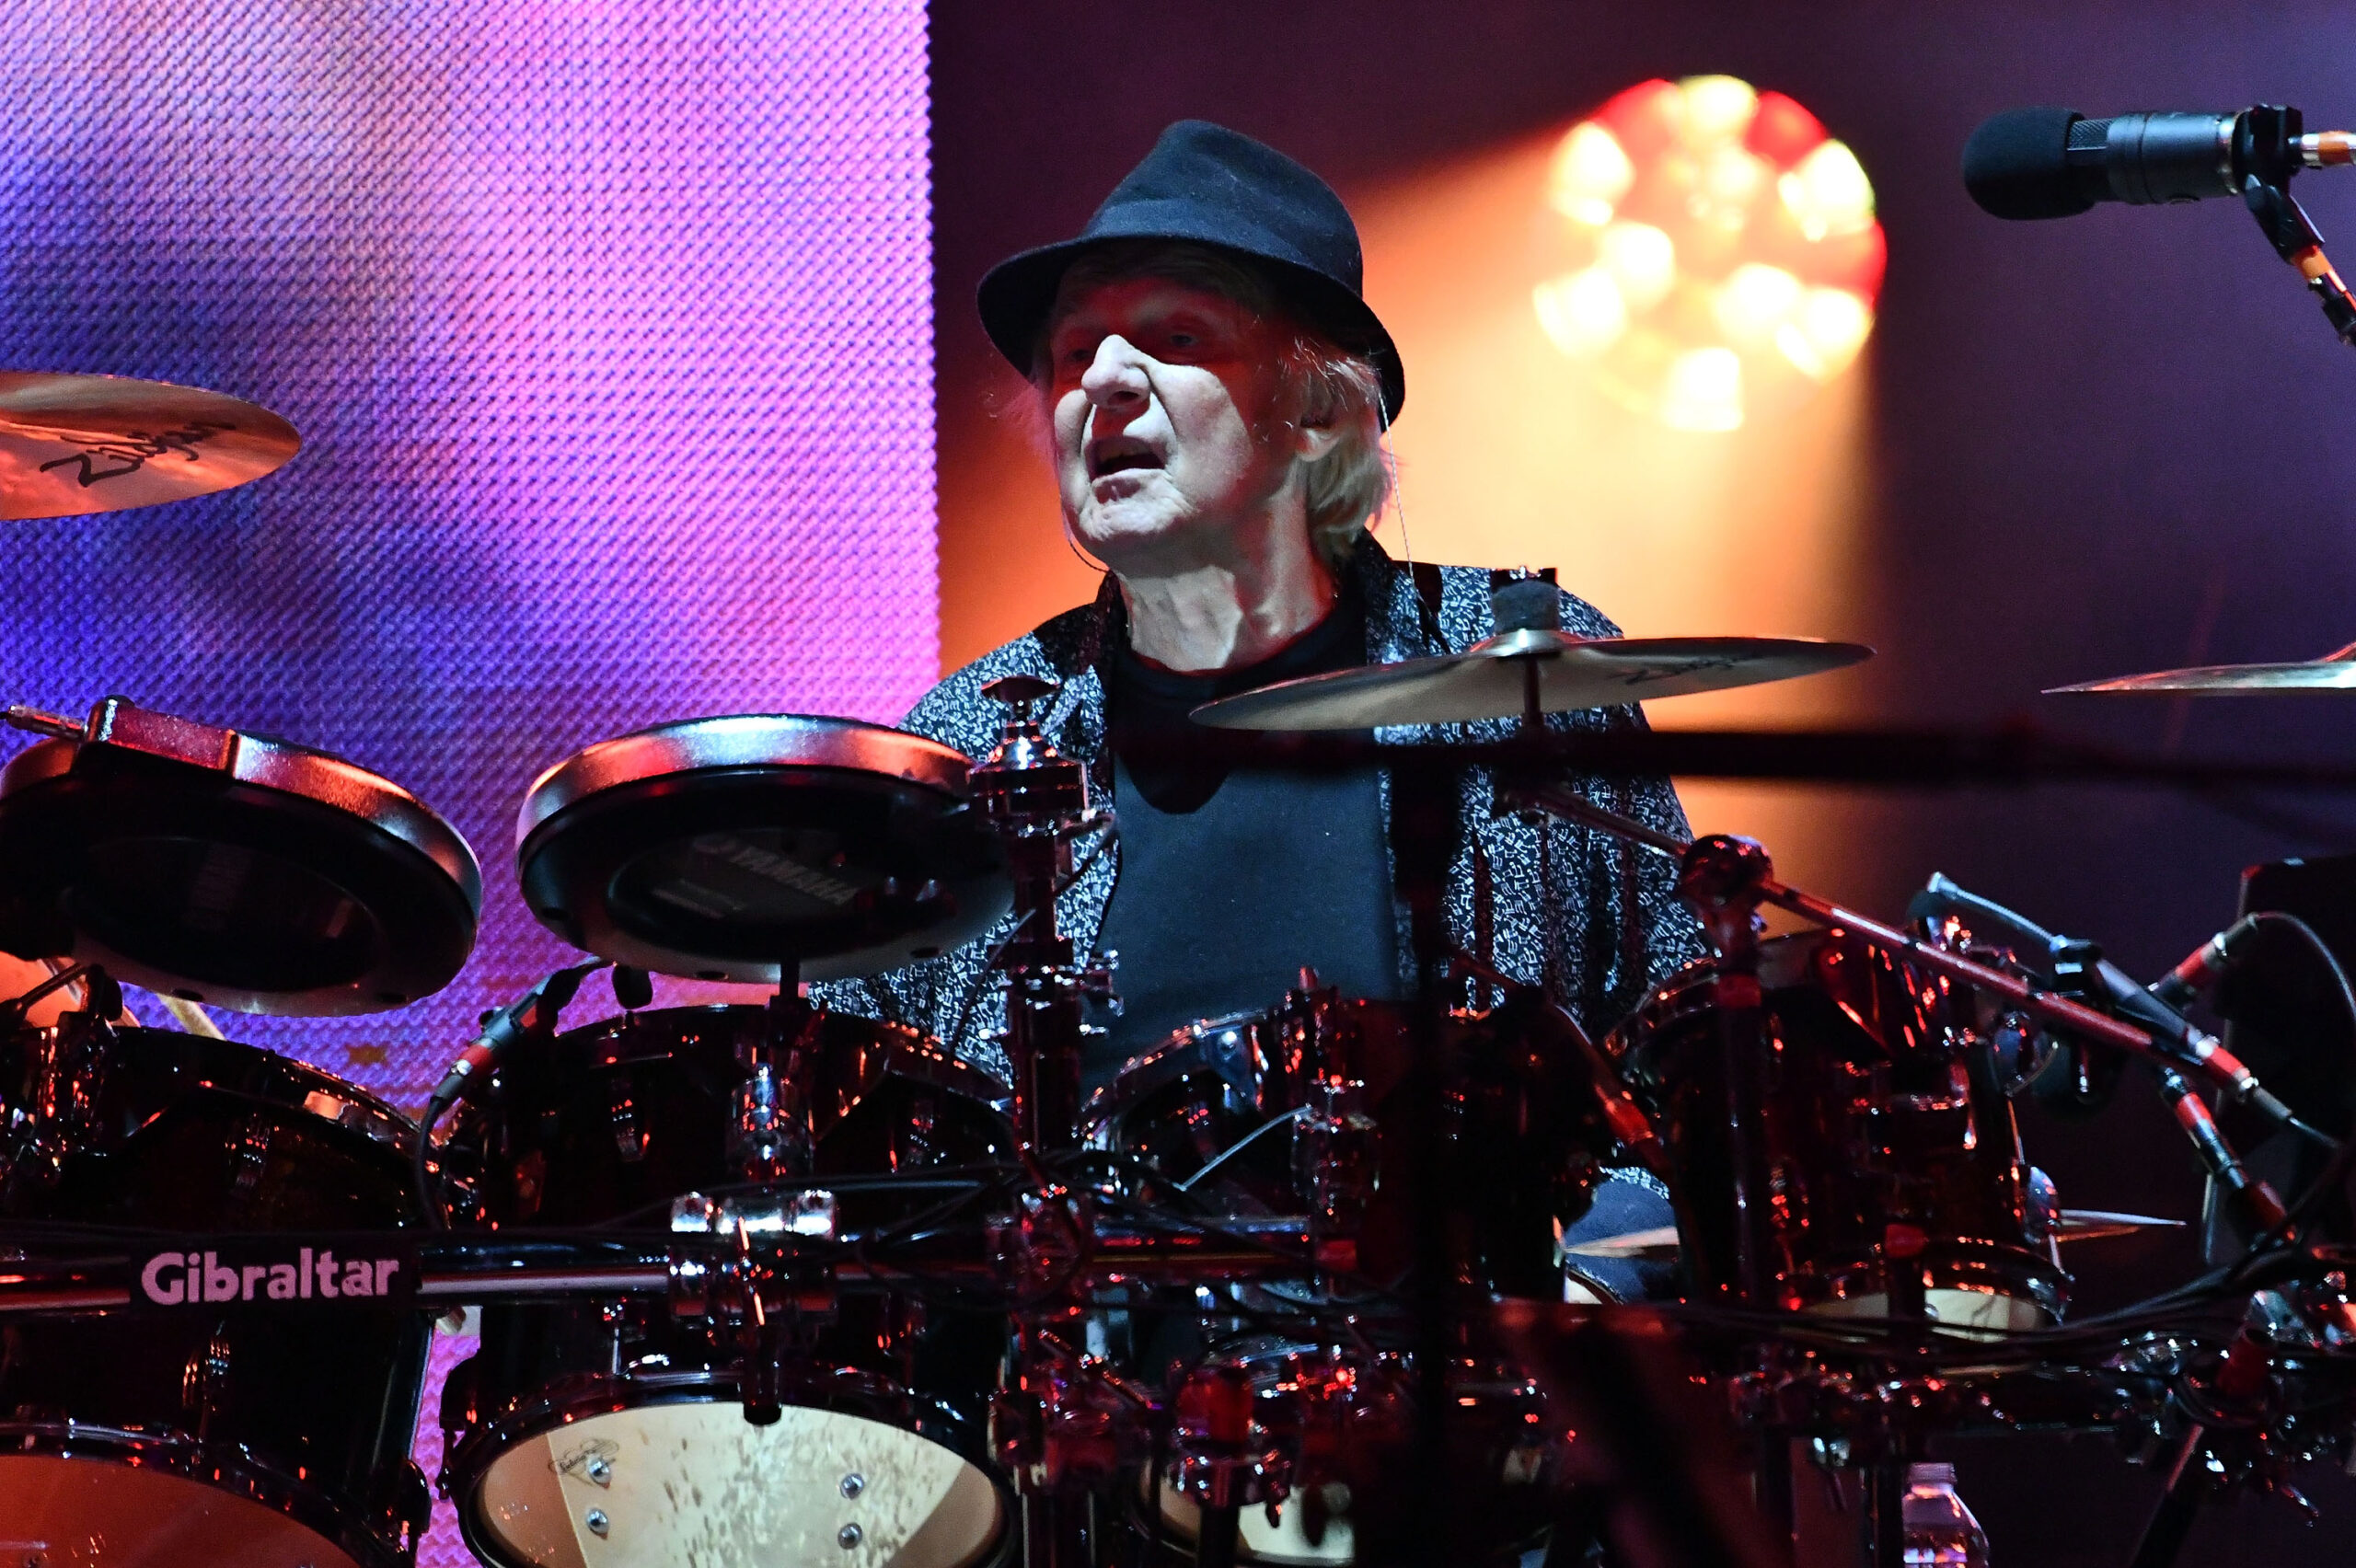 HOLLYWOOD, CA - JUNE 19:  Rock and Roll Hall of Fame member Alan White, drummer of the classic rock band Yes, performs onstage as a special guest during the band's 50th Anniversary tour at Ford Theatre on June 19, 2018 in Hollywood, California.  (Photo by Scott Dudelson/Getty Images)